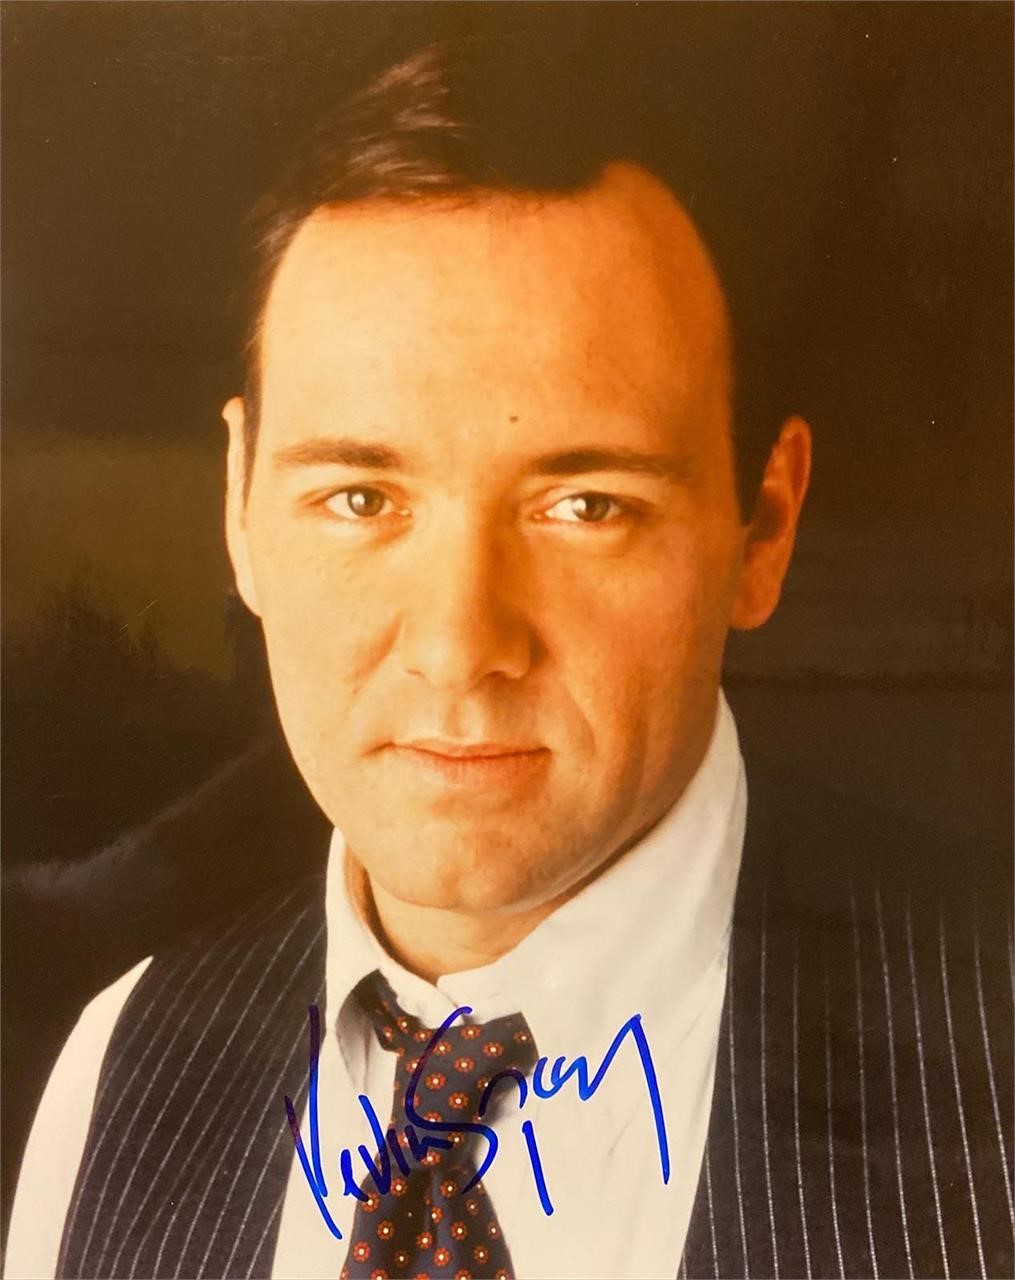 Kevin Spacey signed photo